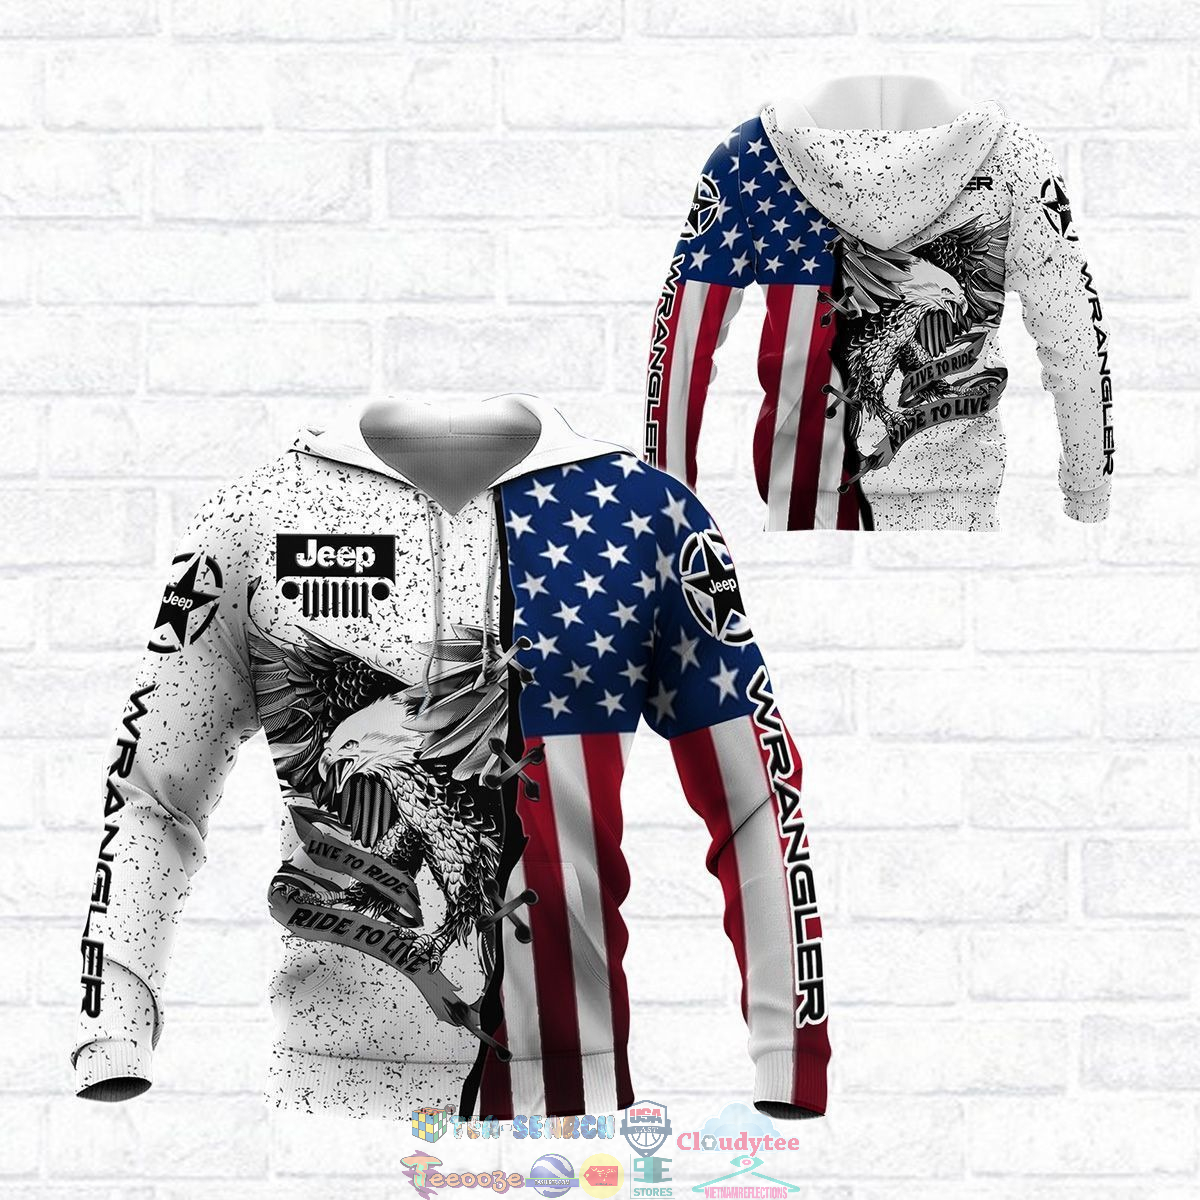 2PnlcVlm-TH050822-16xxxJeep-Wrangler-Eagle-American-Flag-ver-2-3D-hoodie-and-t-shirt3.jpg